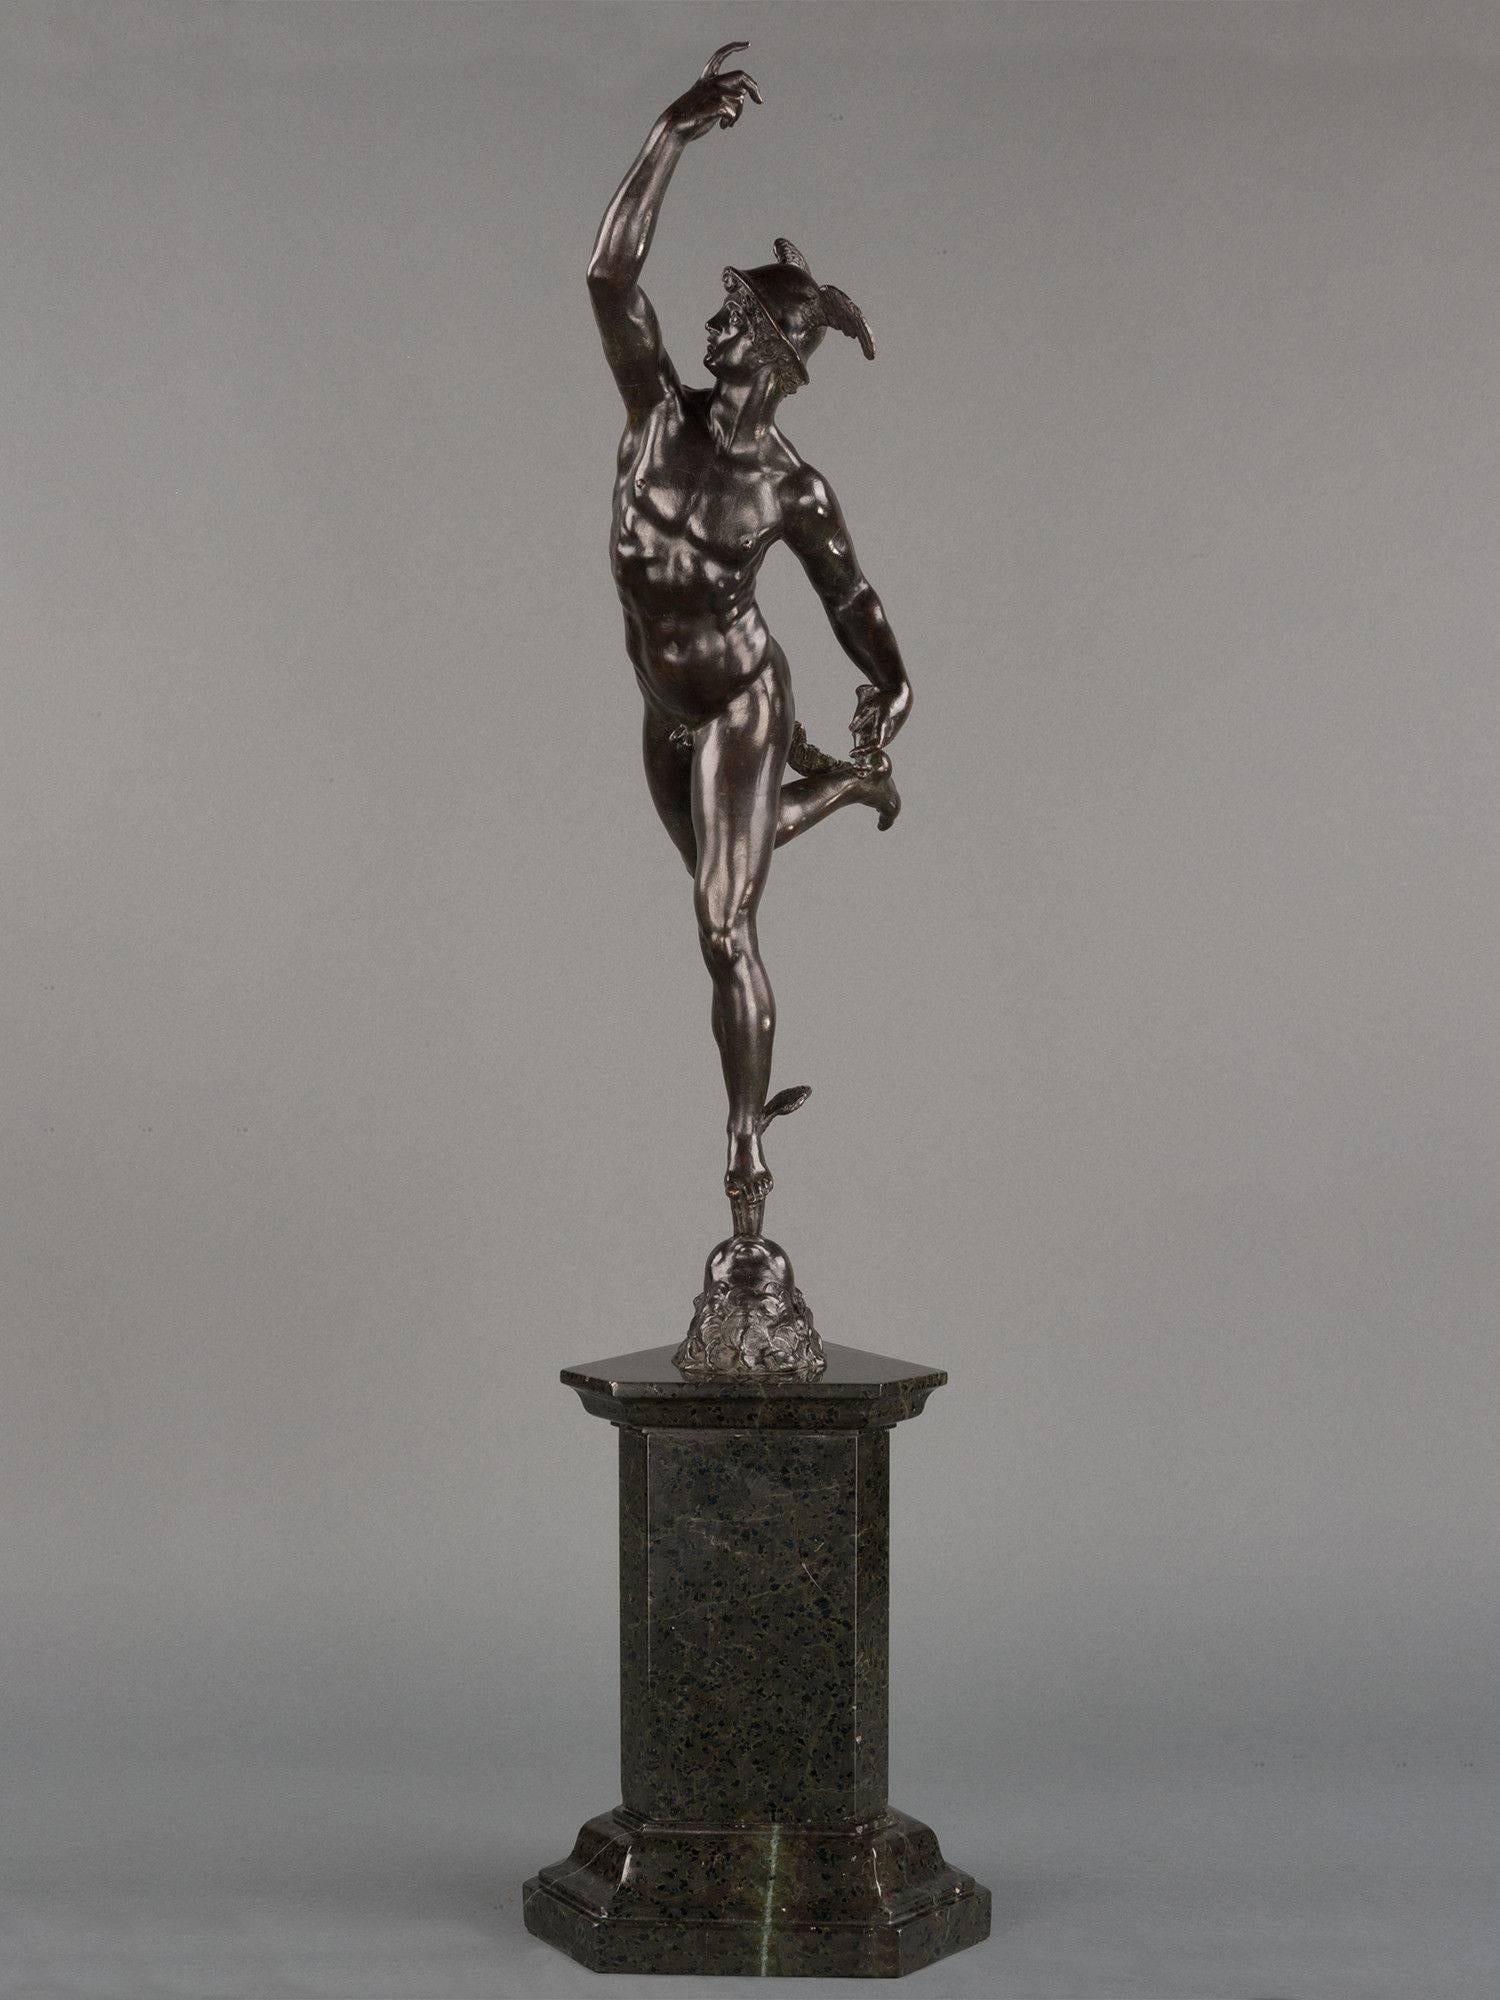 His toes upon the head of Zephyrus on whose breath he glides after Giambologna. 

Caduceus now missing. 

Remains of brown lacquer under a greenish black patina. 

Standing on a modern green serpentine base. 

Mid-18th century.

Size: 48cm